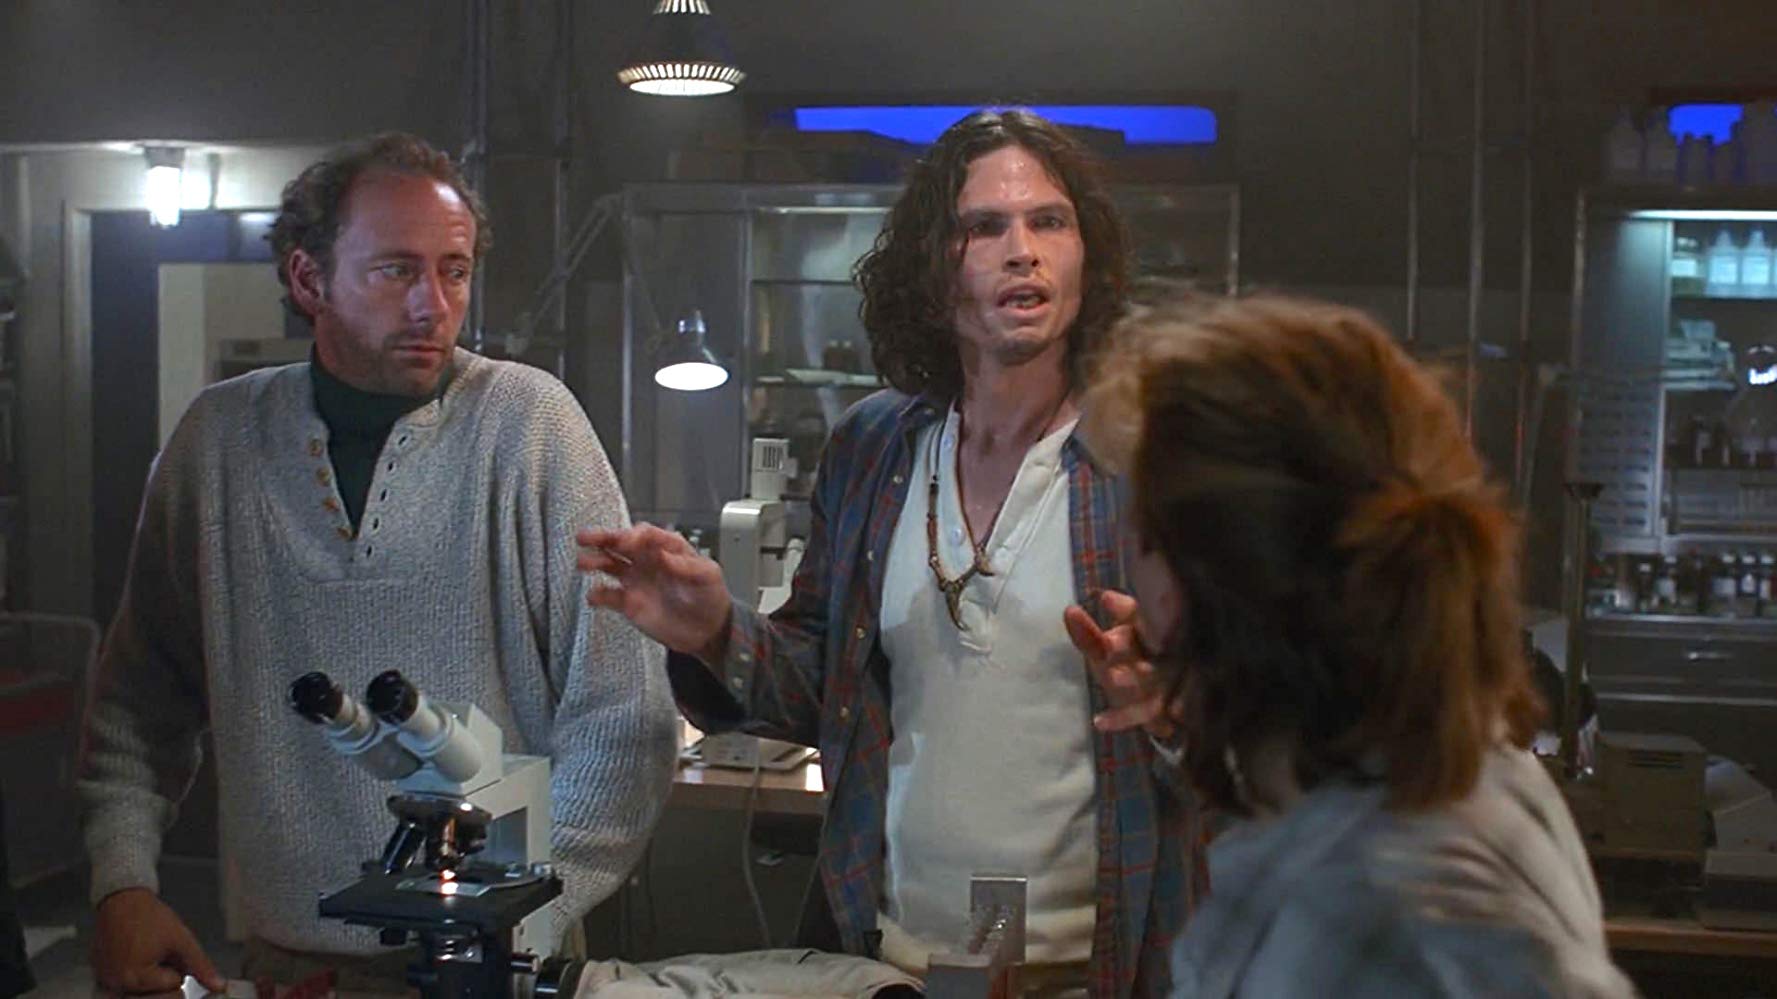 One hostile-looking man talking to two other people in a lab.